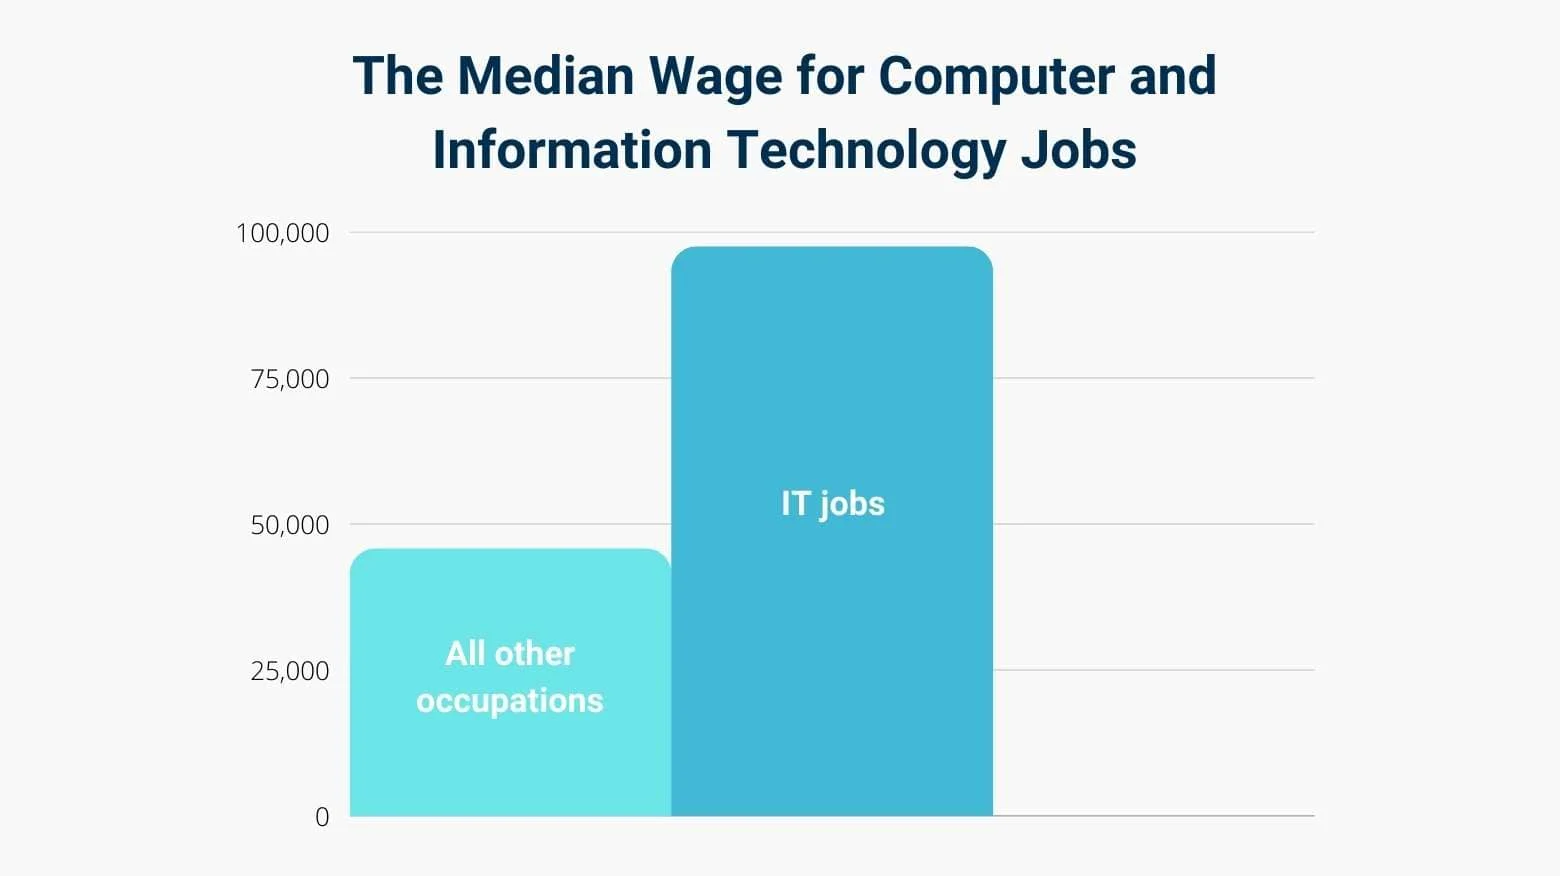 Median wage for it jobs